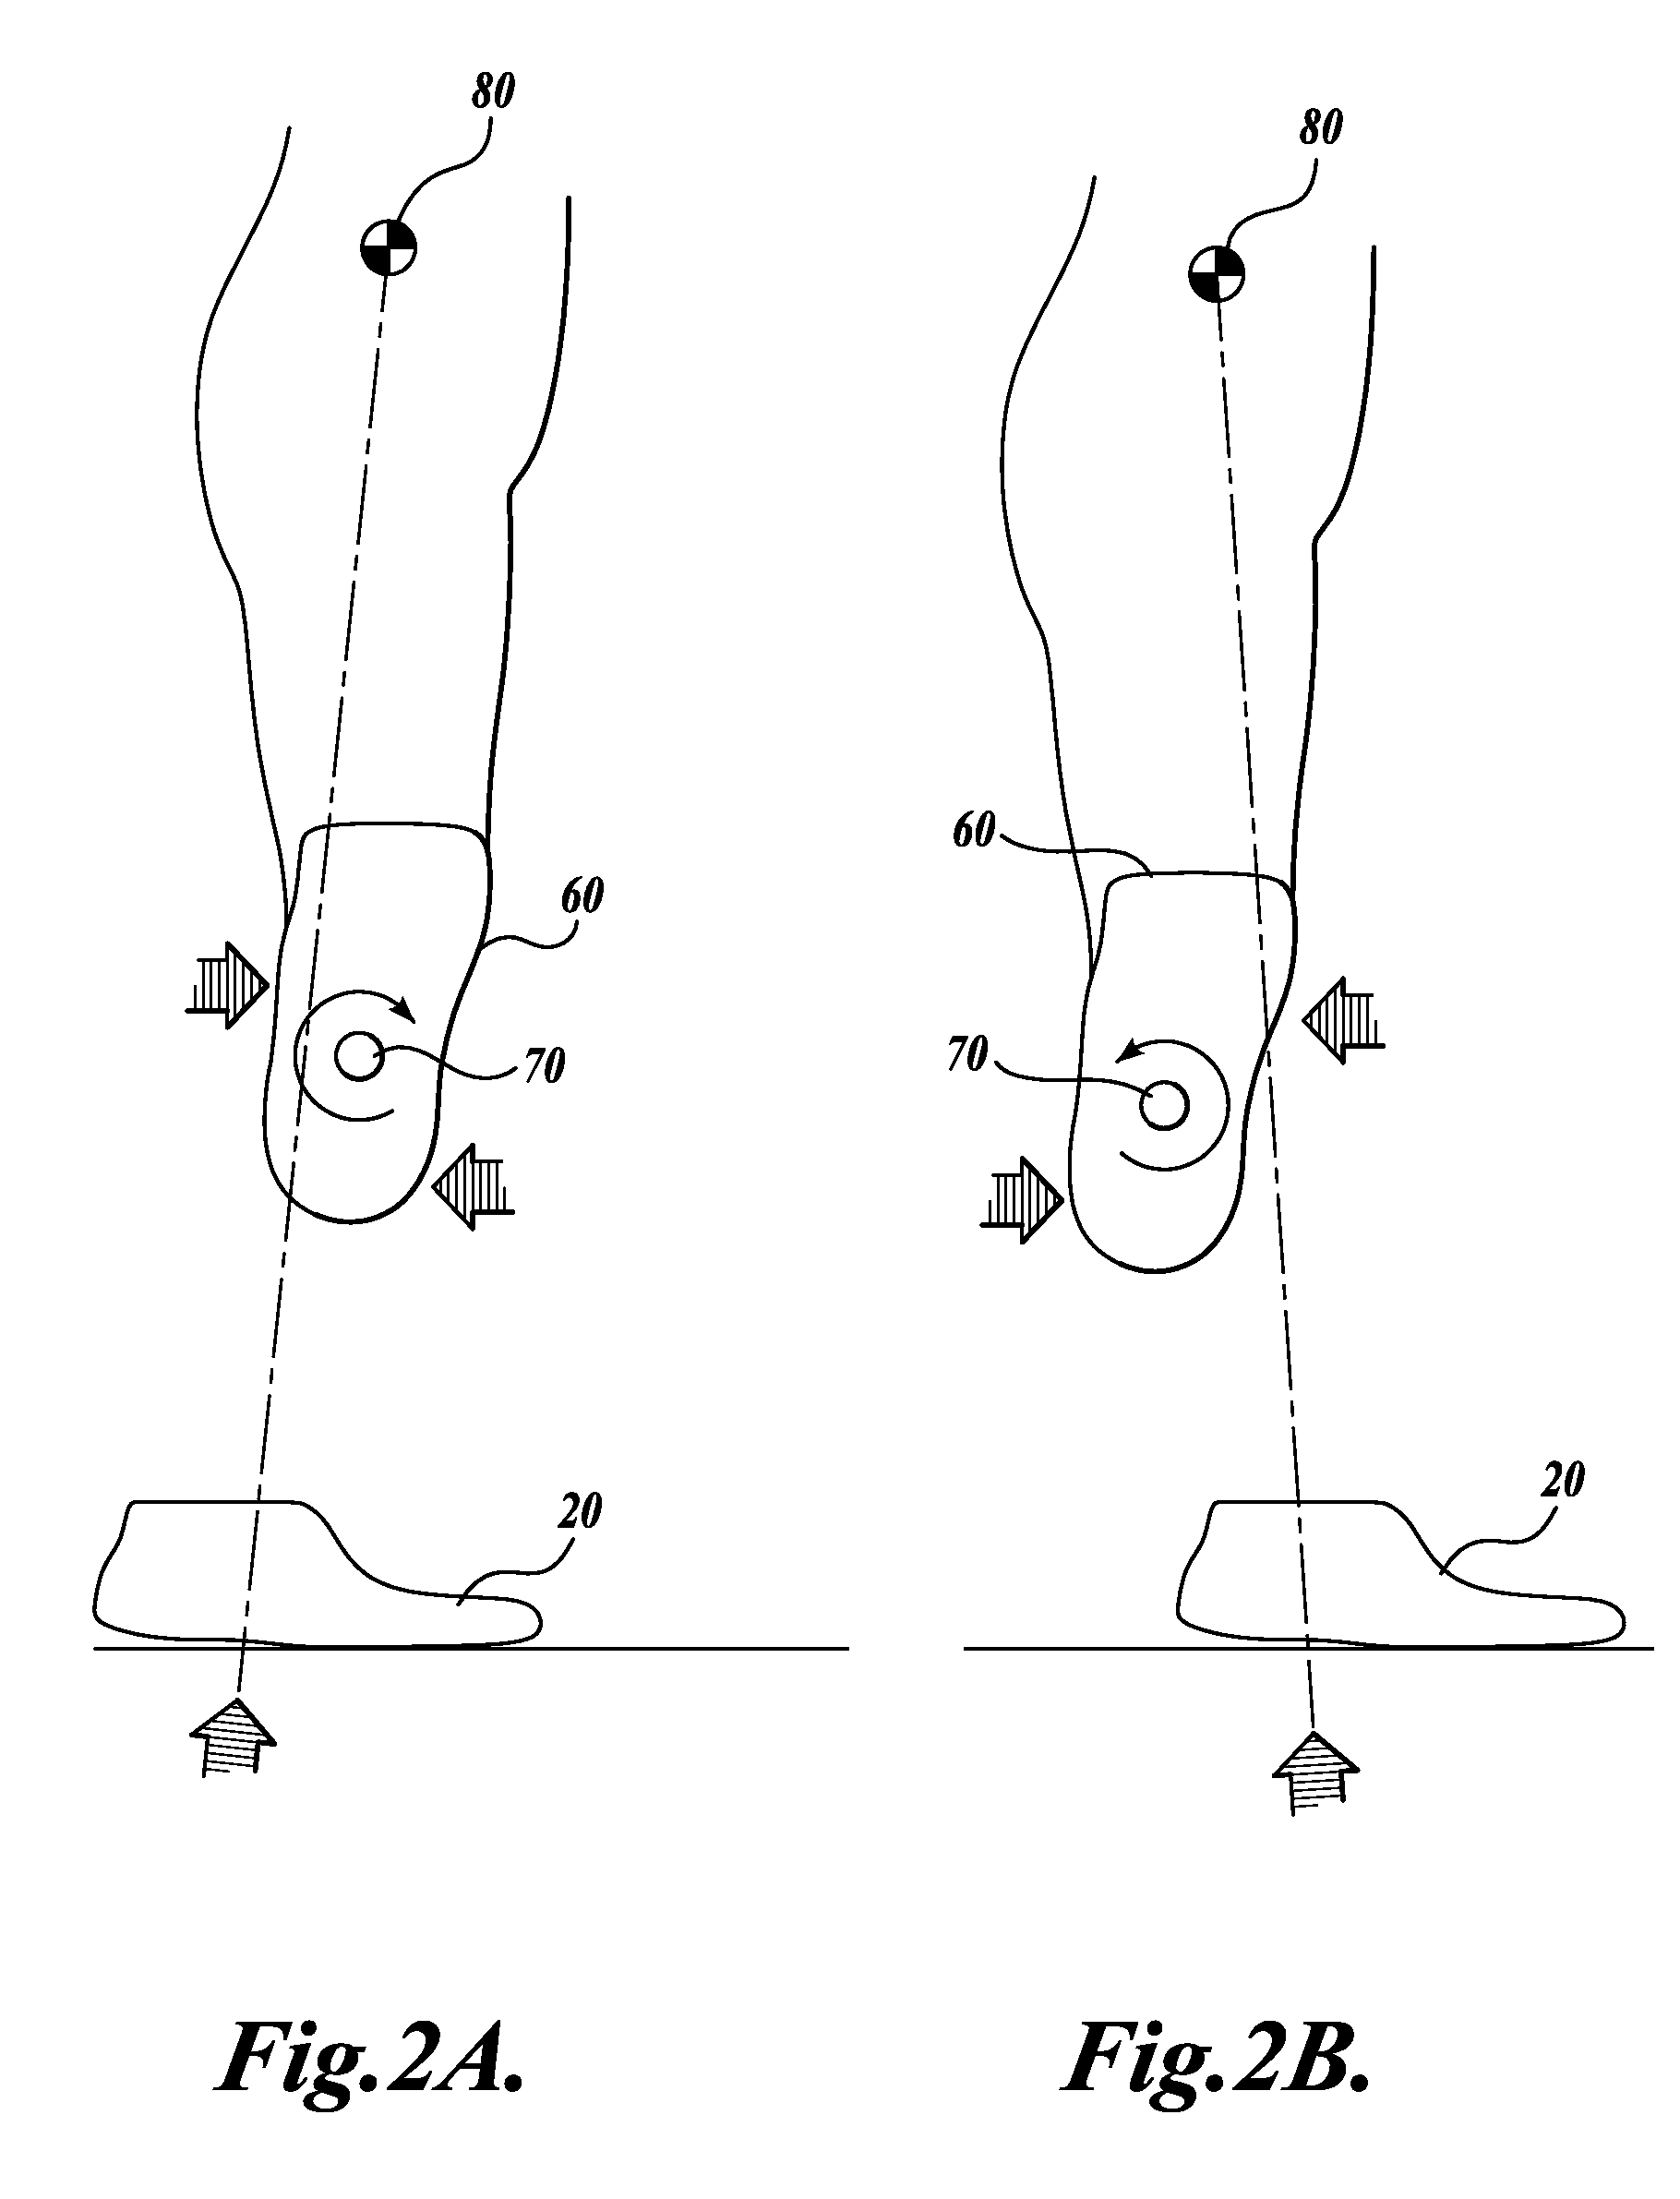 Method for aligning a prosthesis